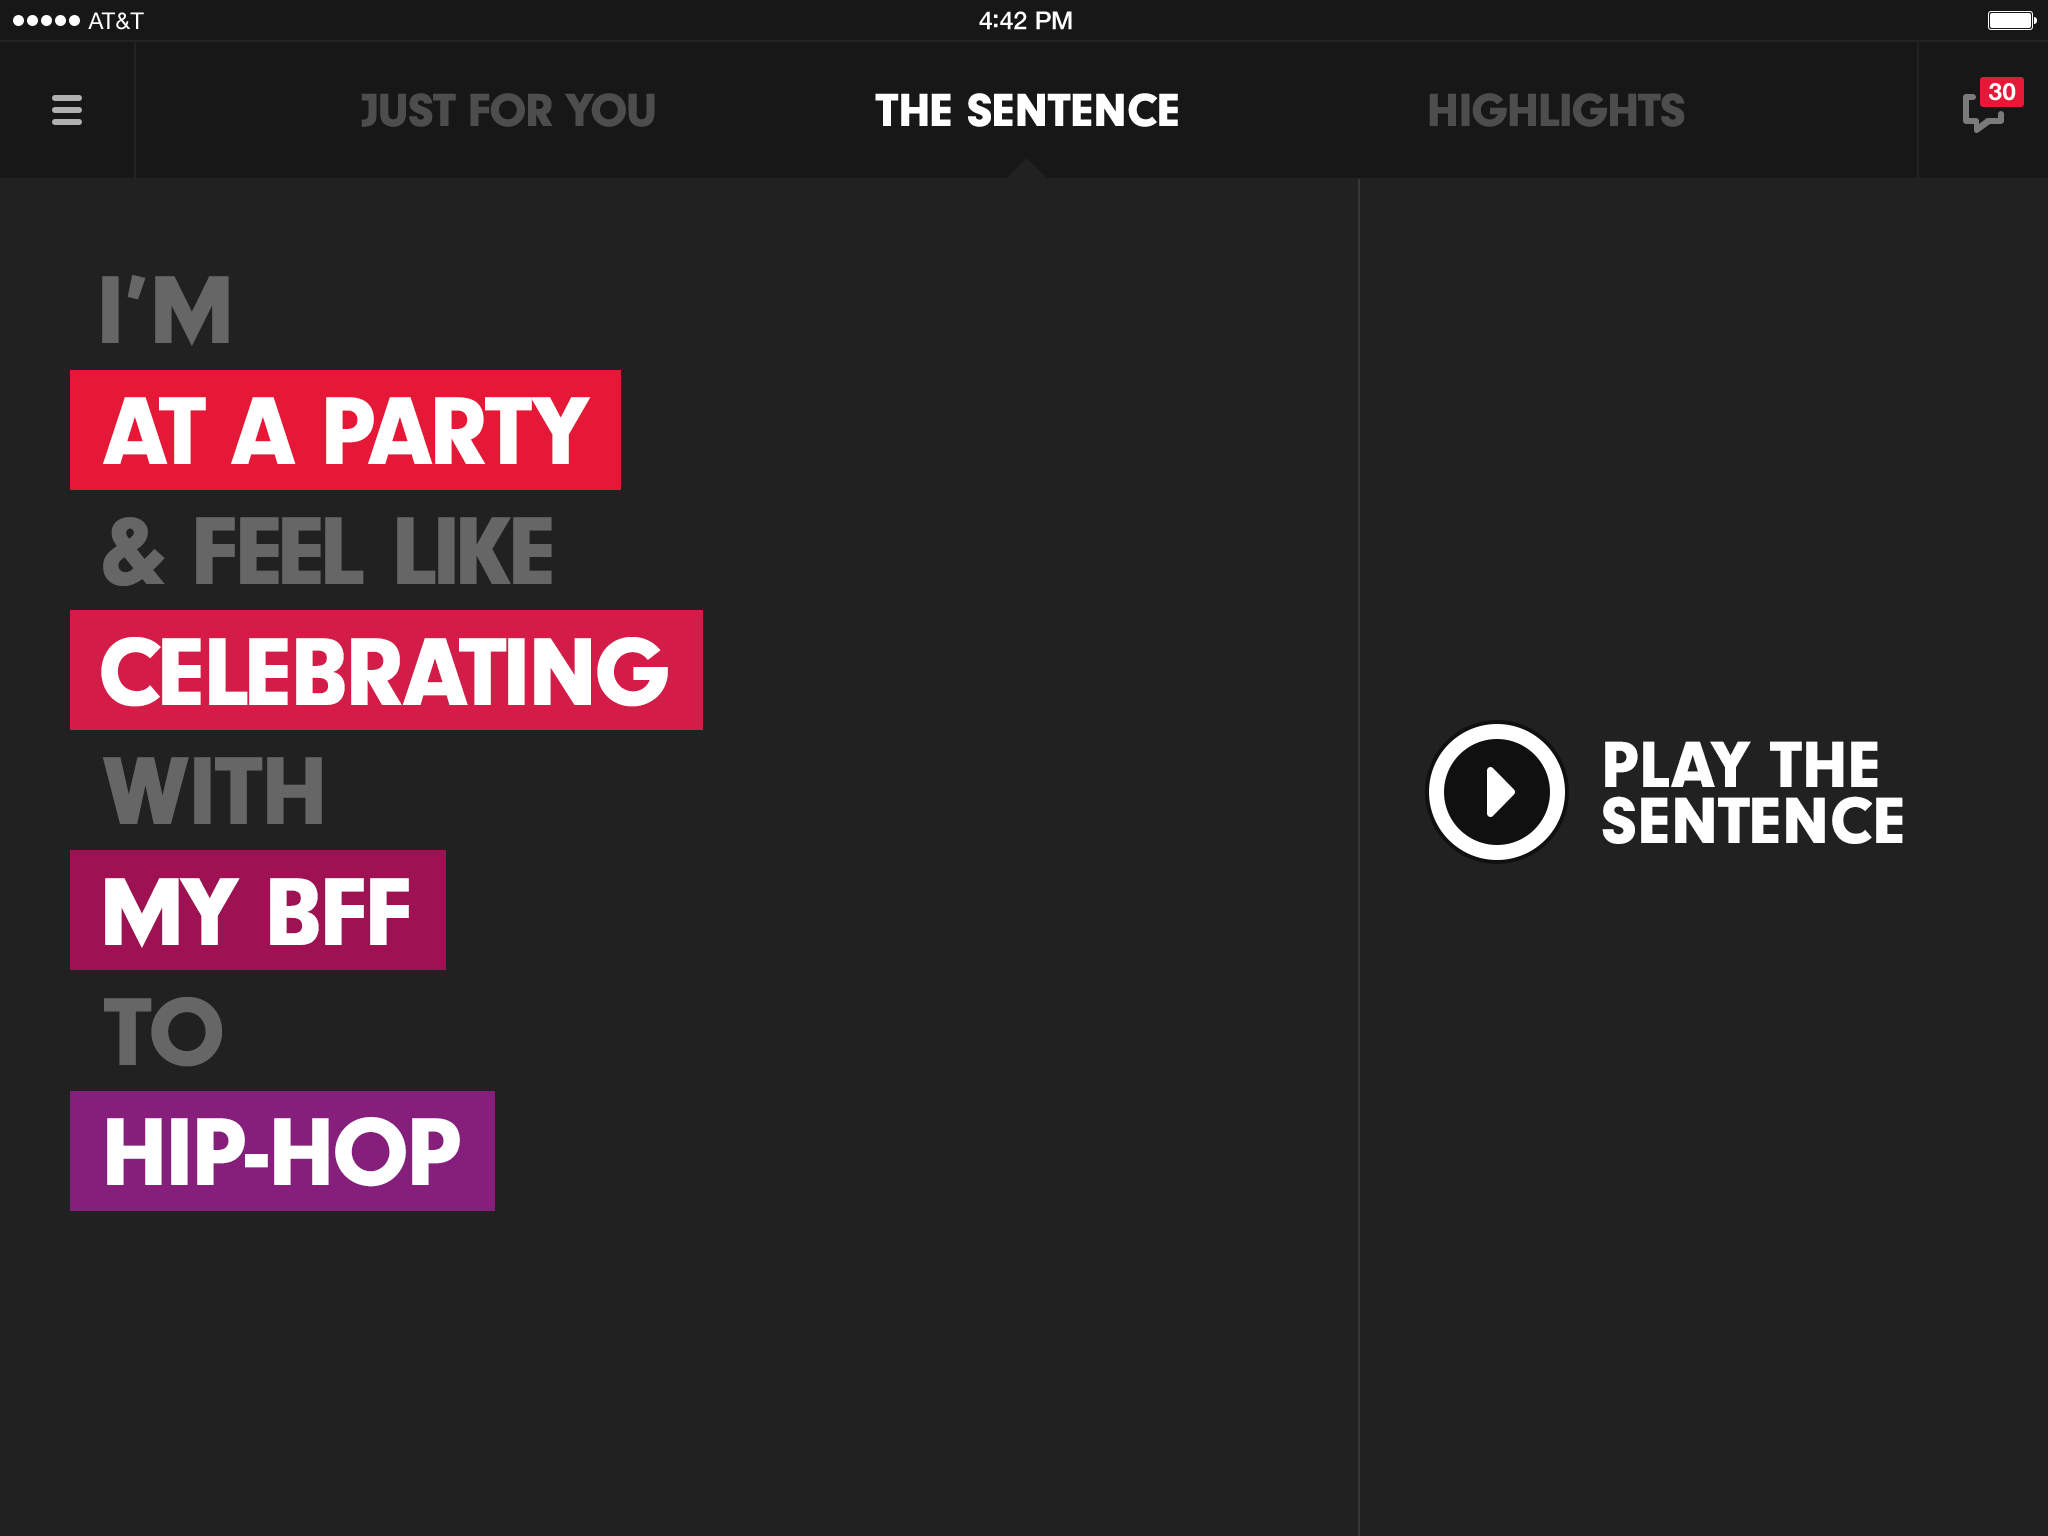 Beats Music Gets Updated With Support for iOS 8, Improved Sharing